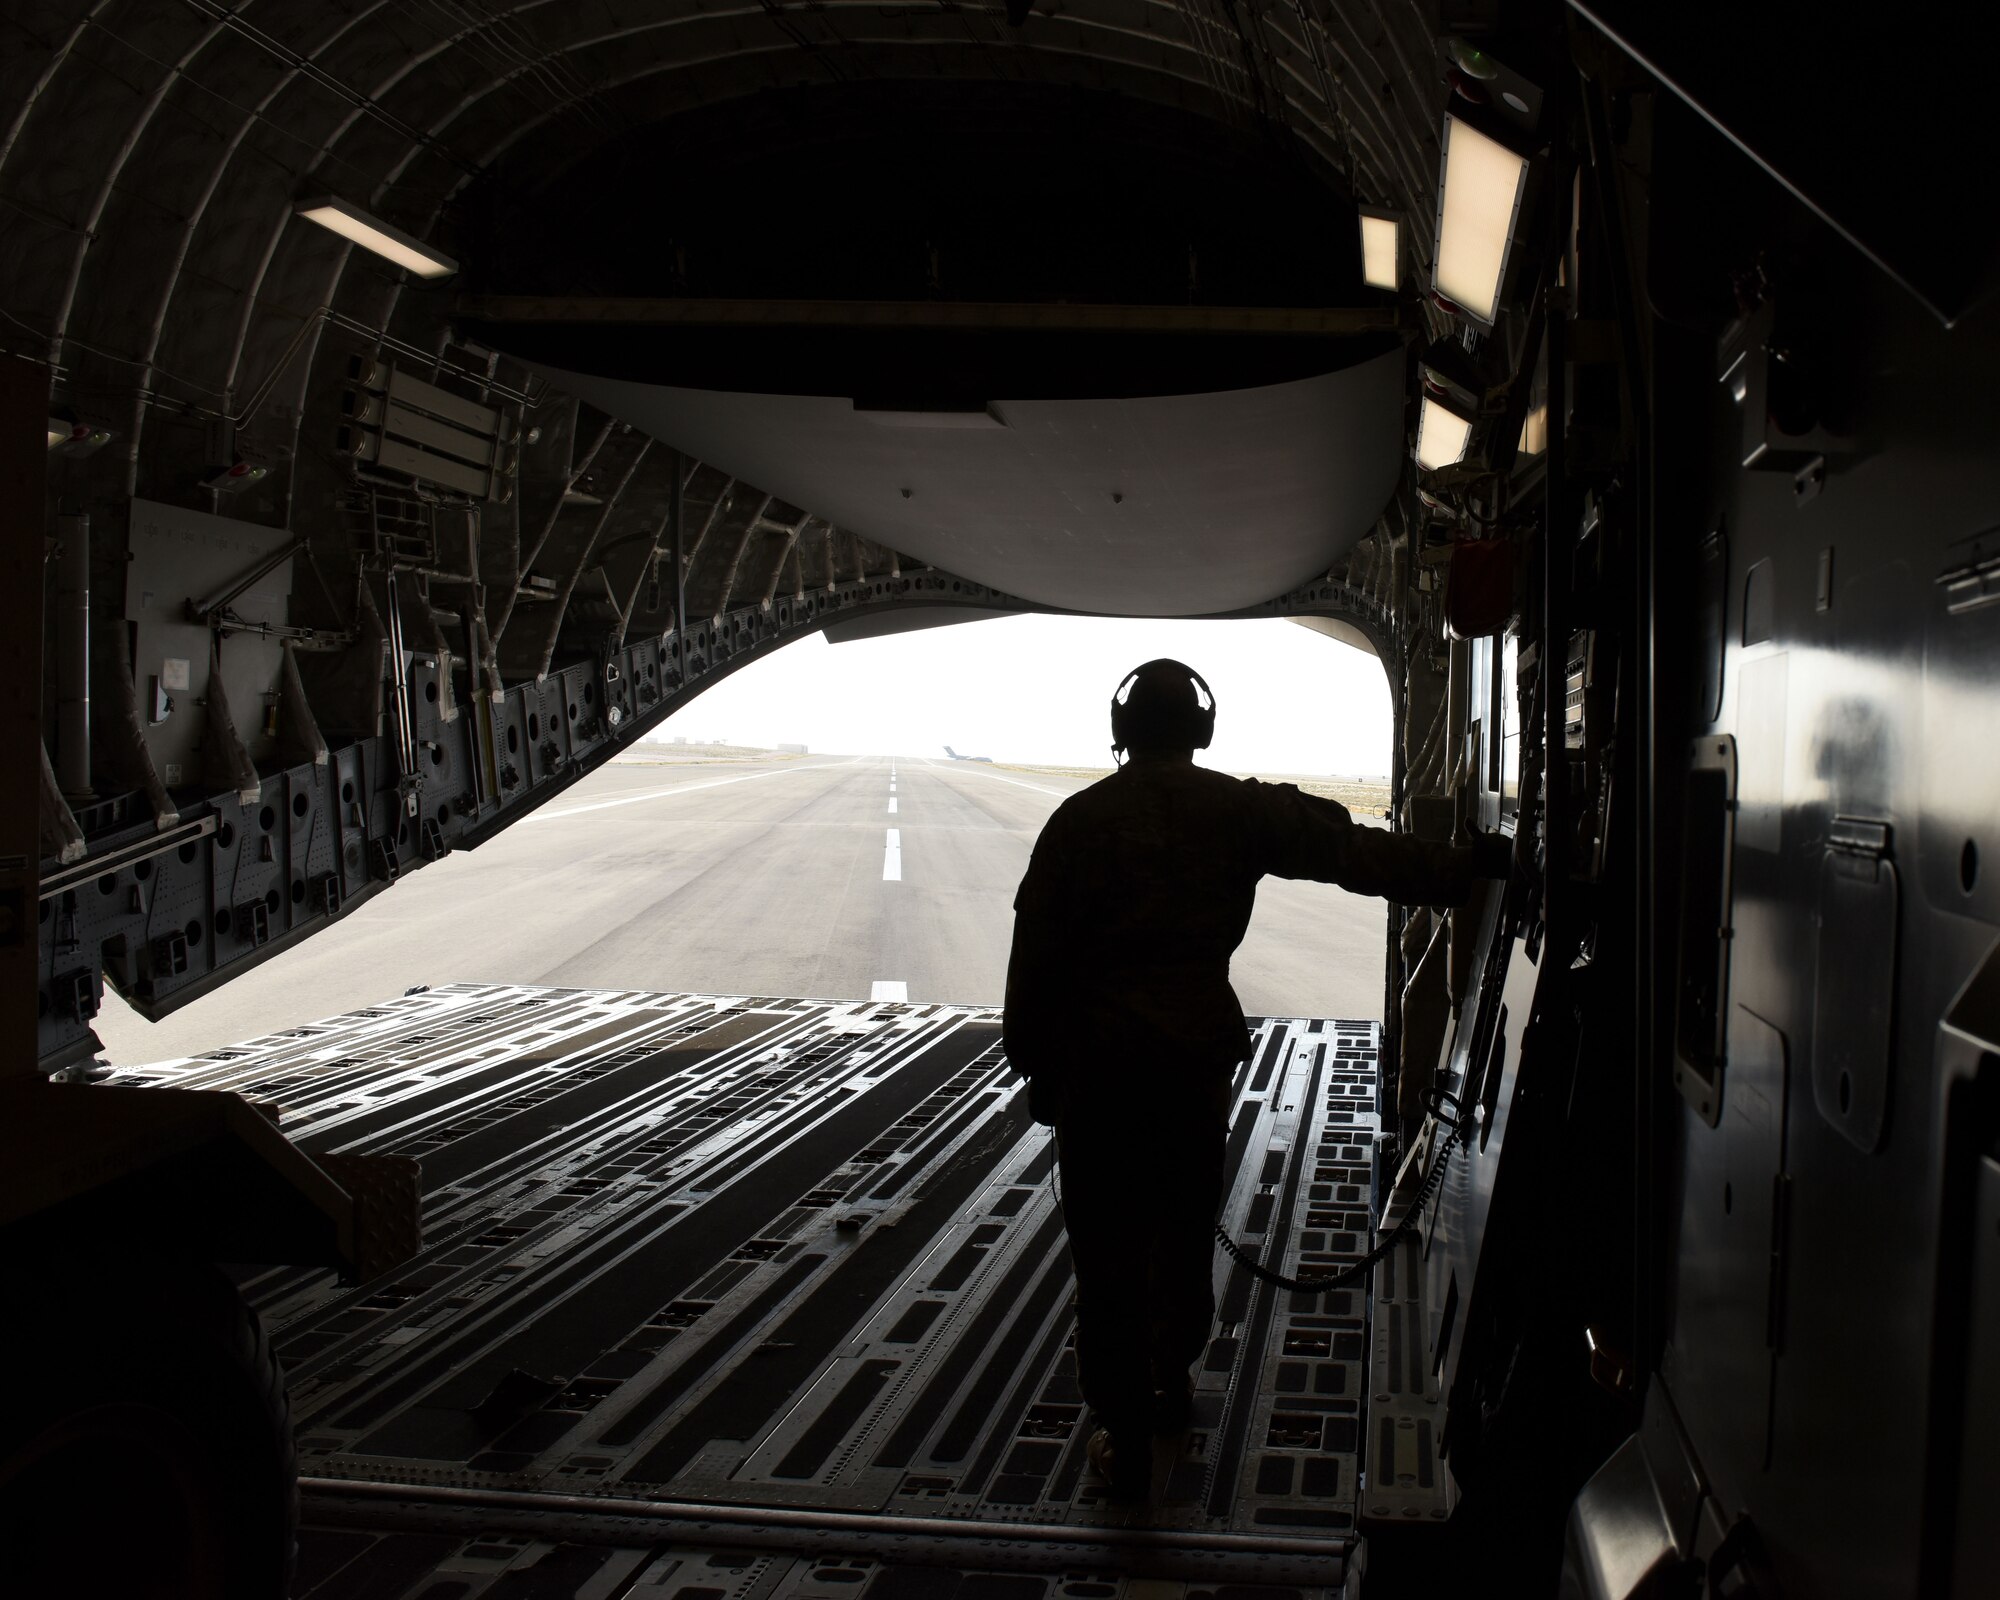 U.S. Air Force Staff Sgt. James Armstrong, 21st Airlift Squadron loadmaster, looks out the back of a C-17 Globemaster III May 19, 2019, at an undisclosed location. The C-17 is capable of rapid strategic delivery of troops and cargo anywhere in the world. (U.S. Air Force photo by 2nd Lt. R. Michael Longoria)